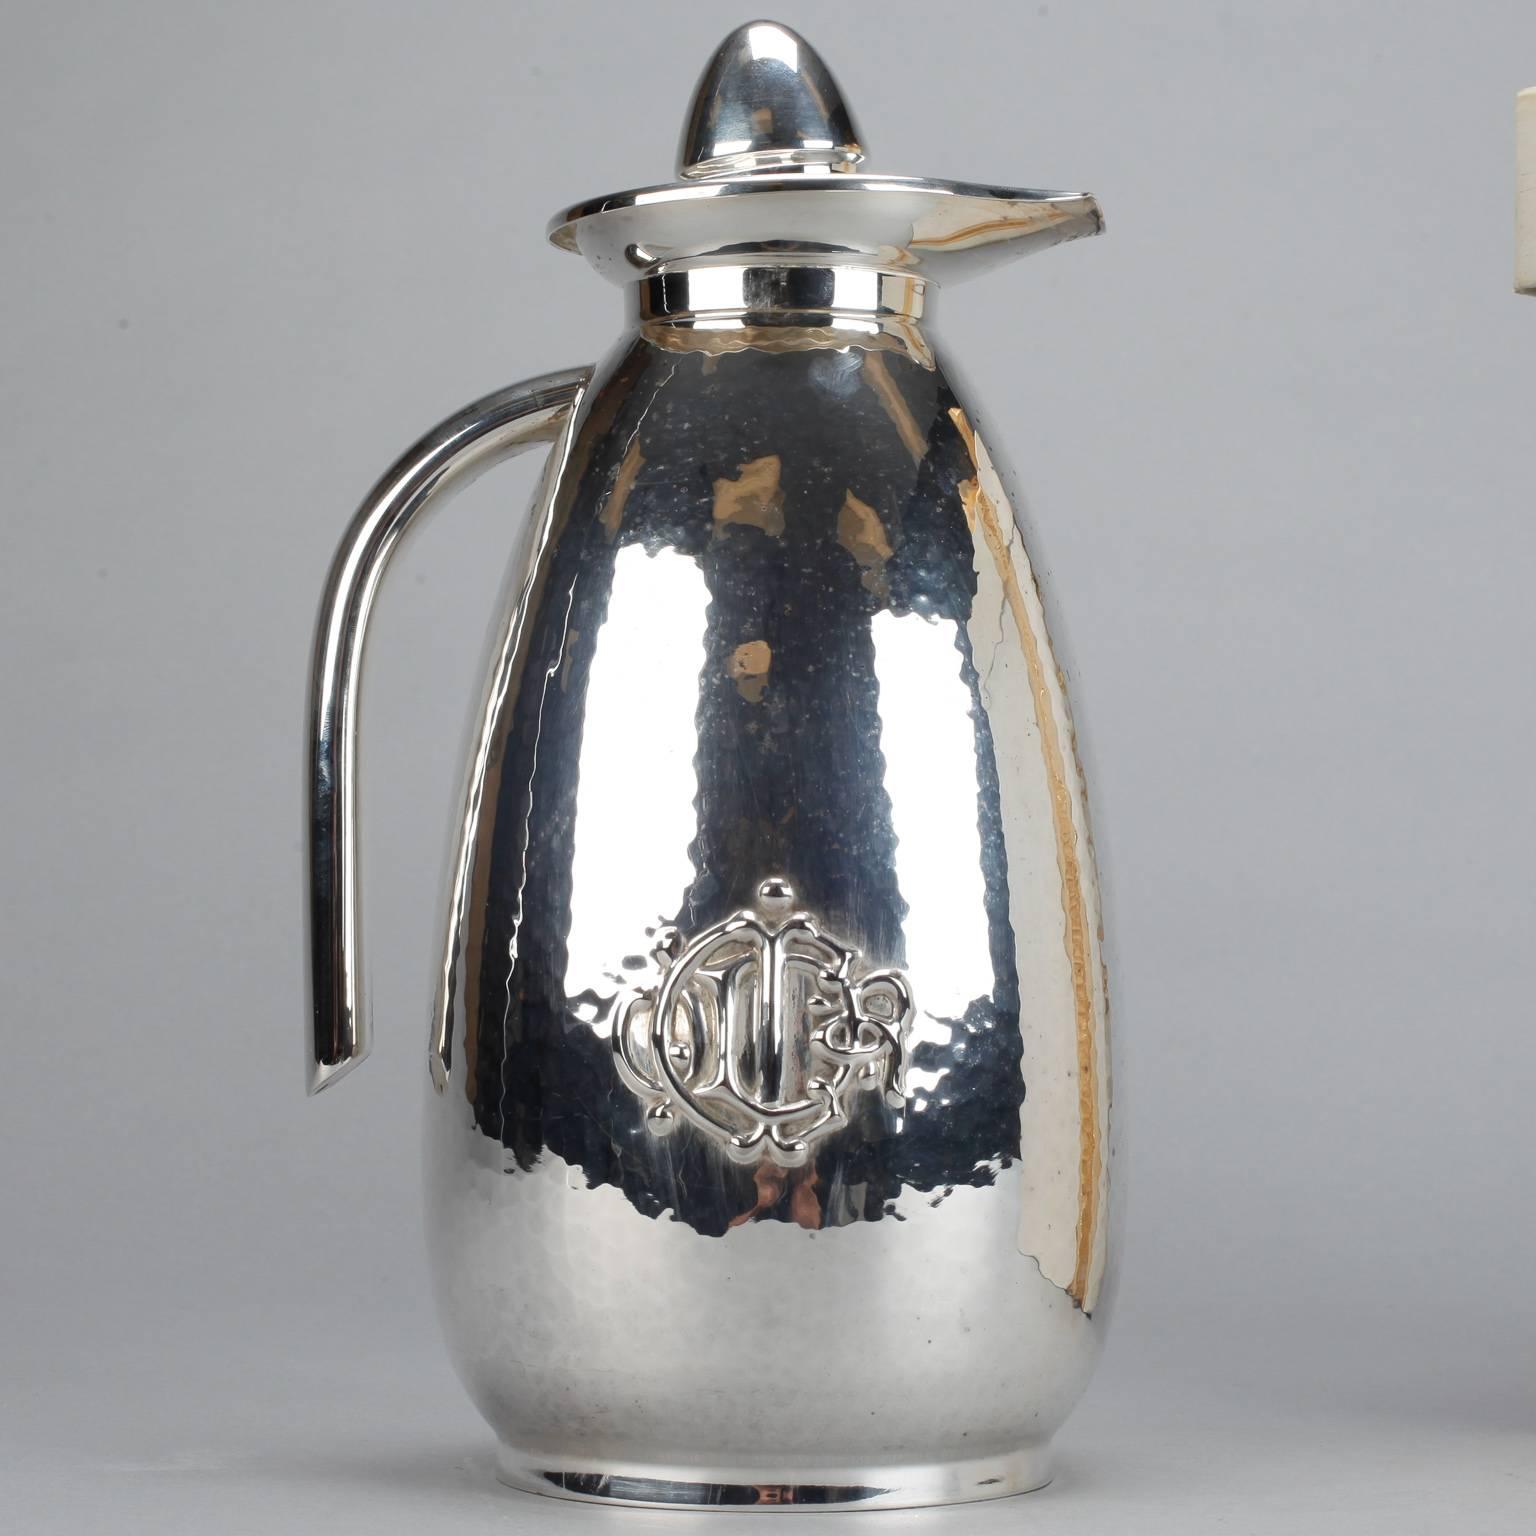 Circa 1970s tall Christian Dior silver plate pitcher with hammered surface texture, stopper, decorative crest in relief at base and original box.